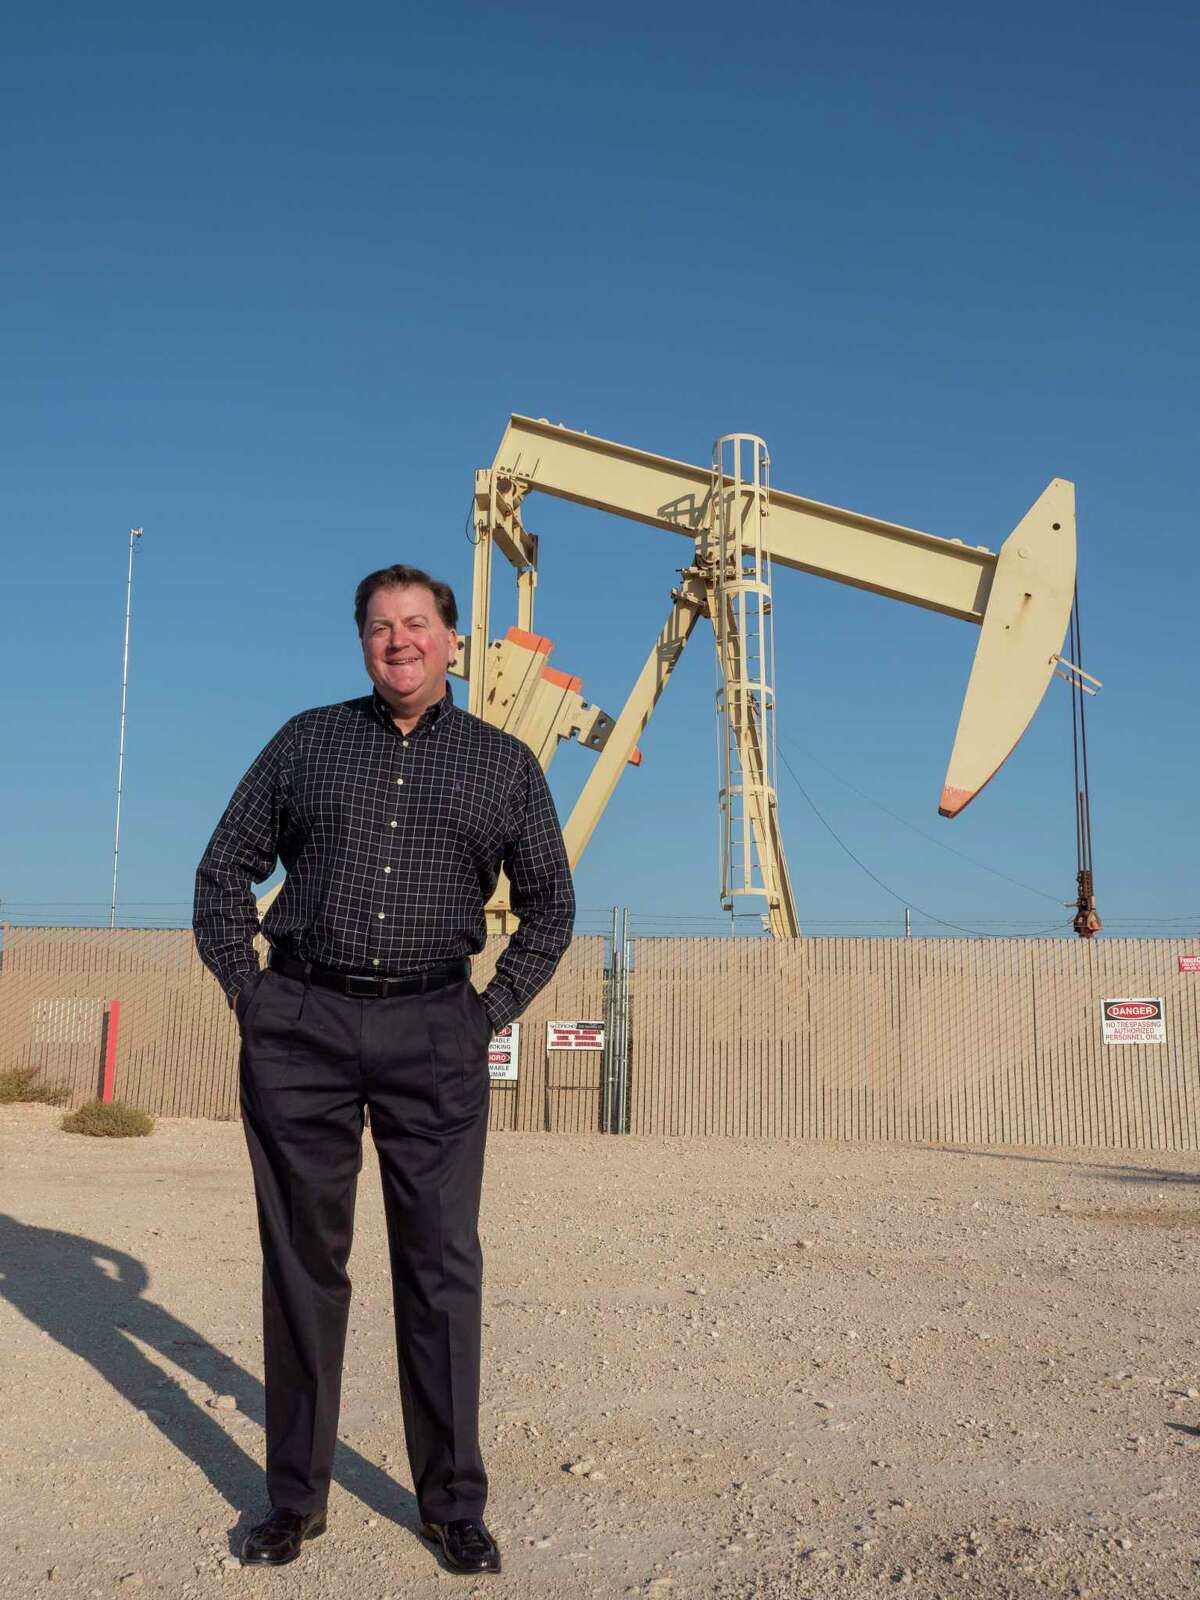 Odessa oilman Kirk Edwards spearheaded the creation of Permian Fuels America, a task force and campaign aimed at encouraging workers not to abandon the industry.